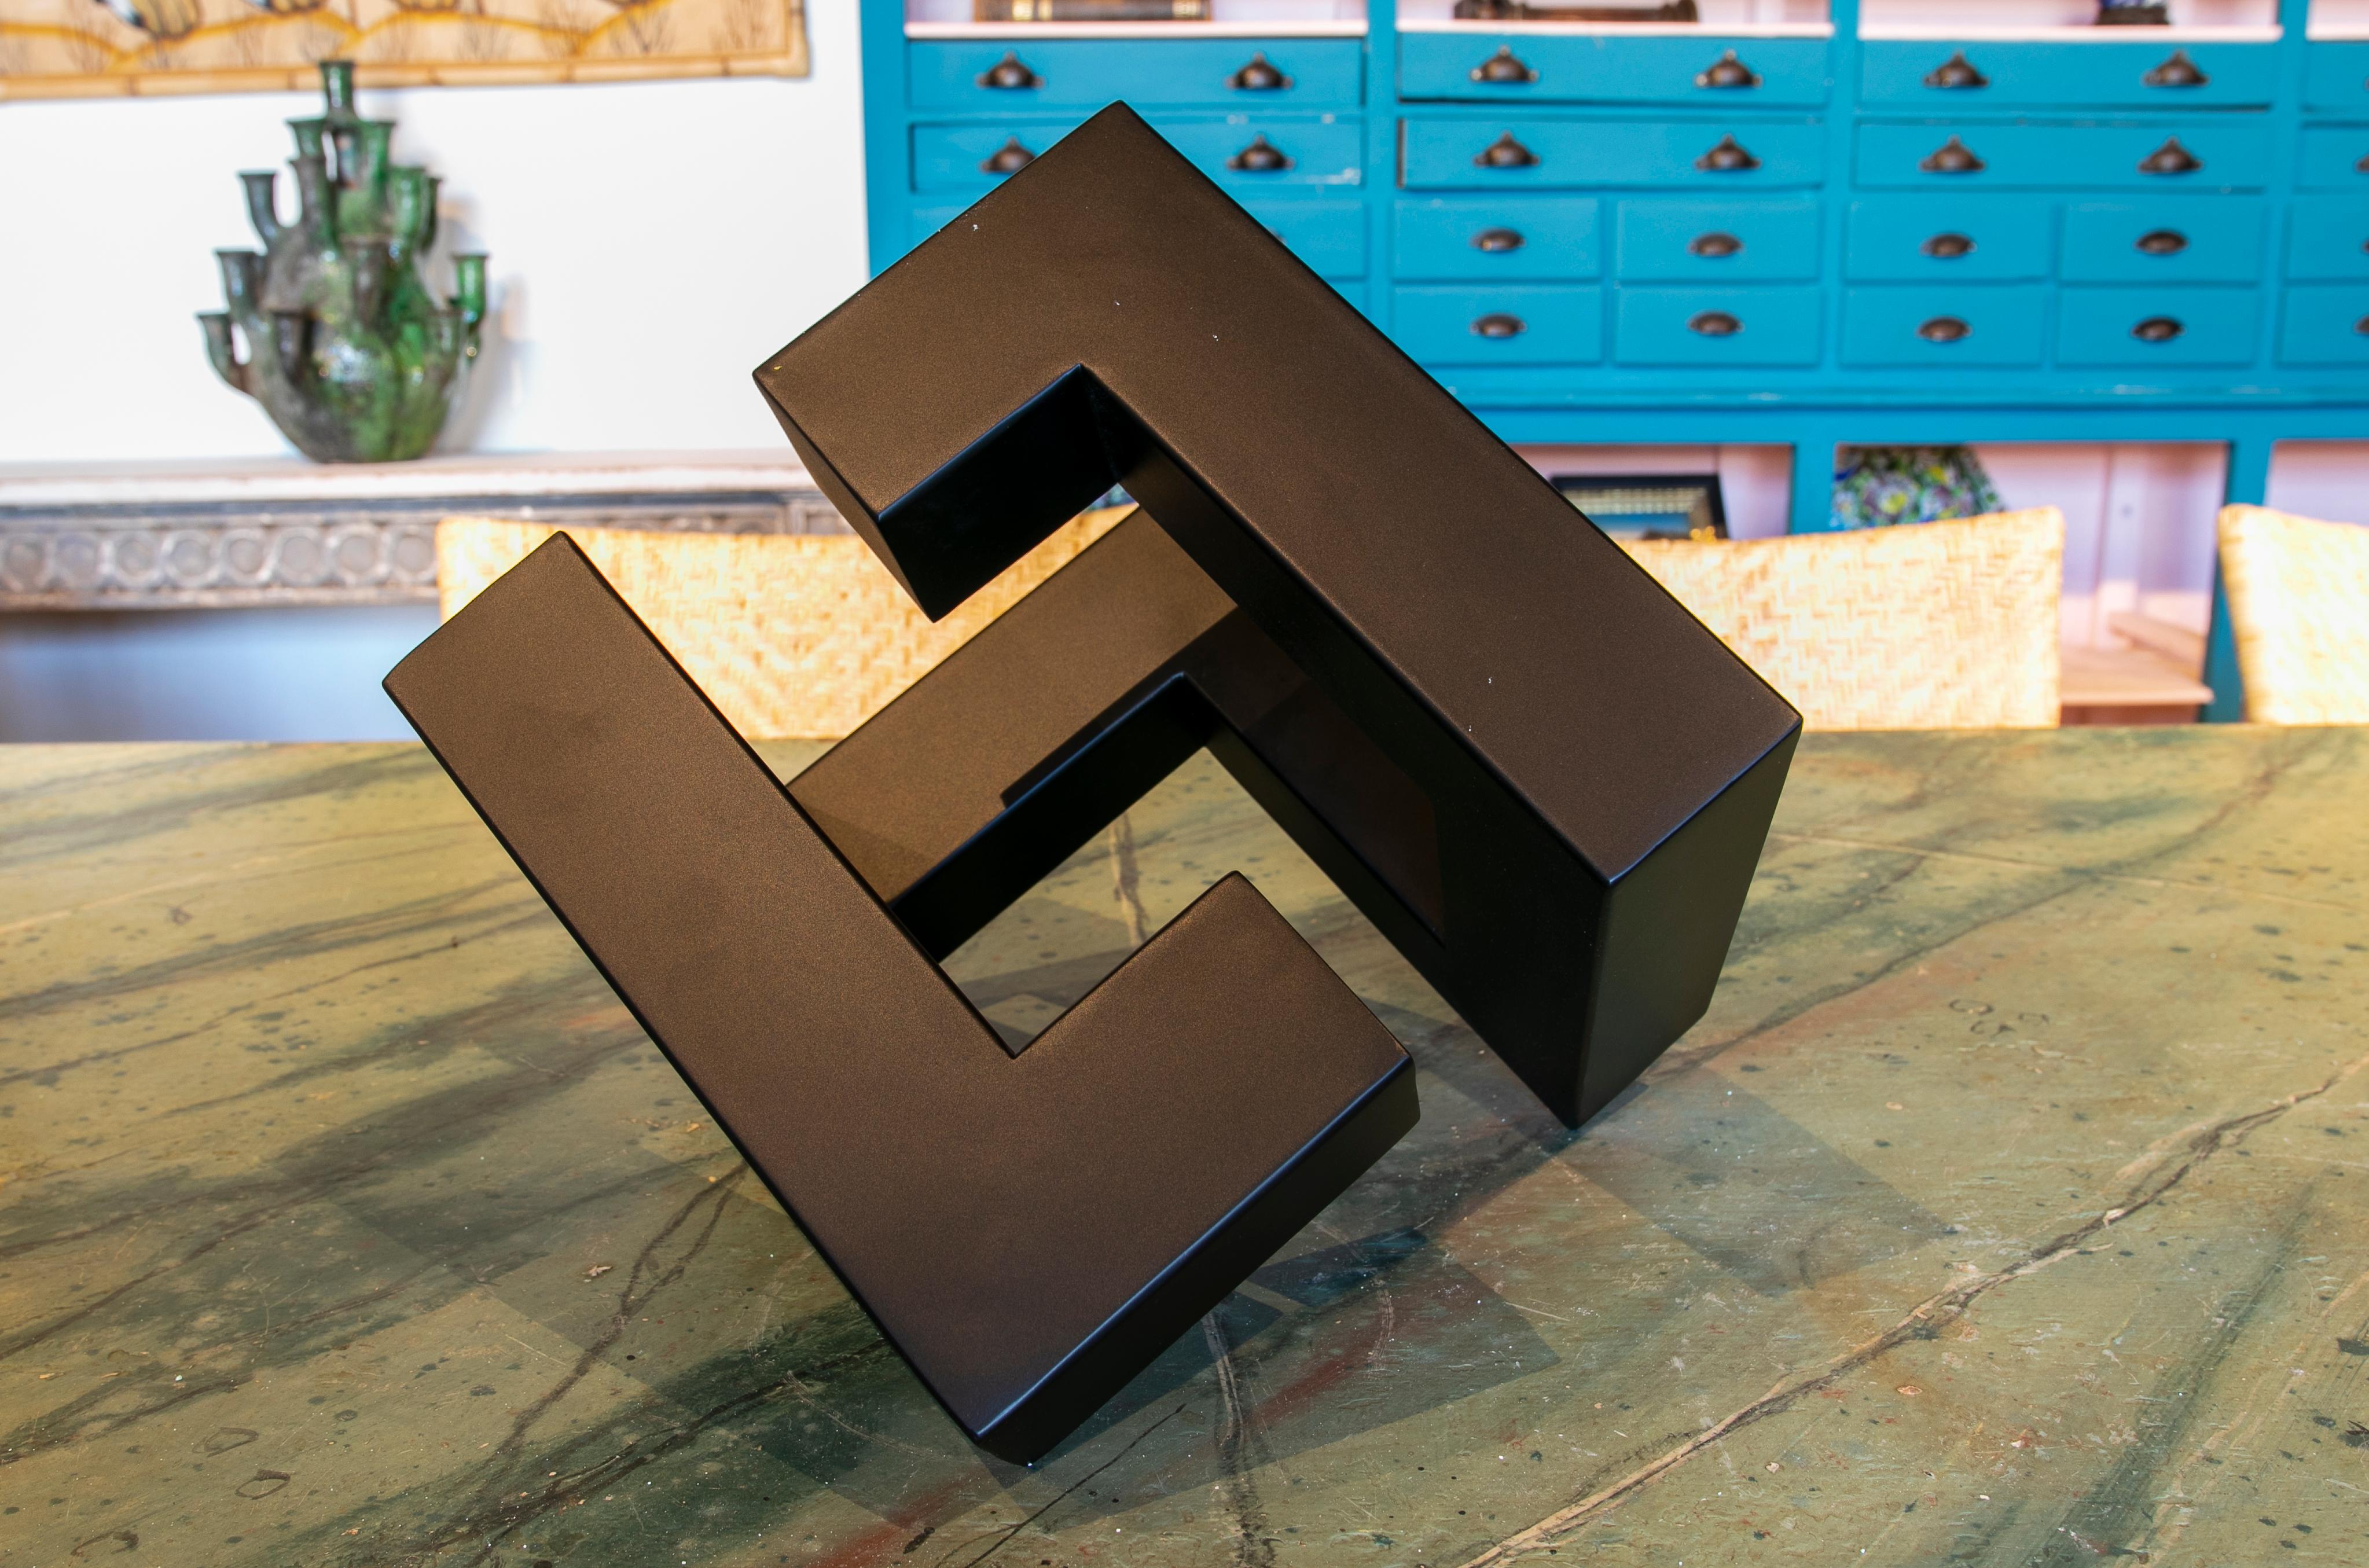 Abstract metal sculpture lacquered in orange with geometric forms.